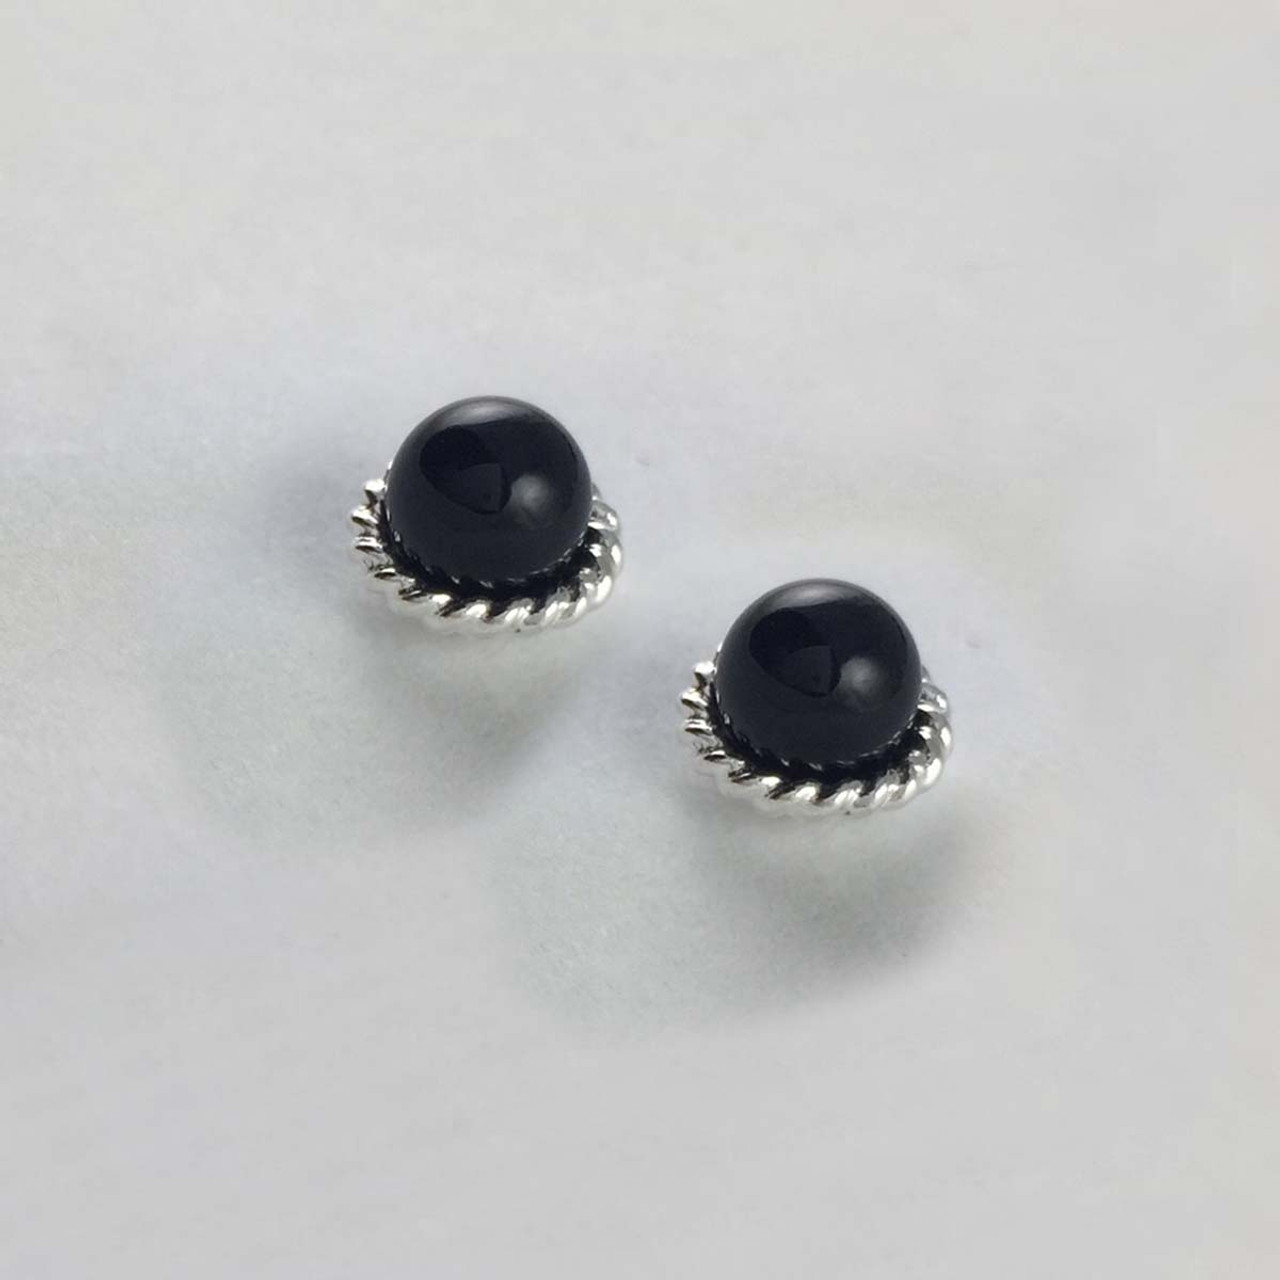 Faceted Black Onyx Earrings – Forever Today by Jilco